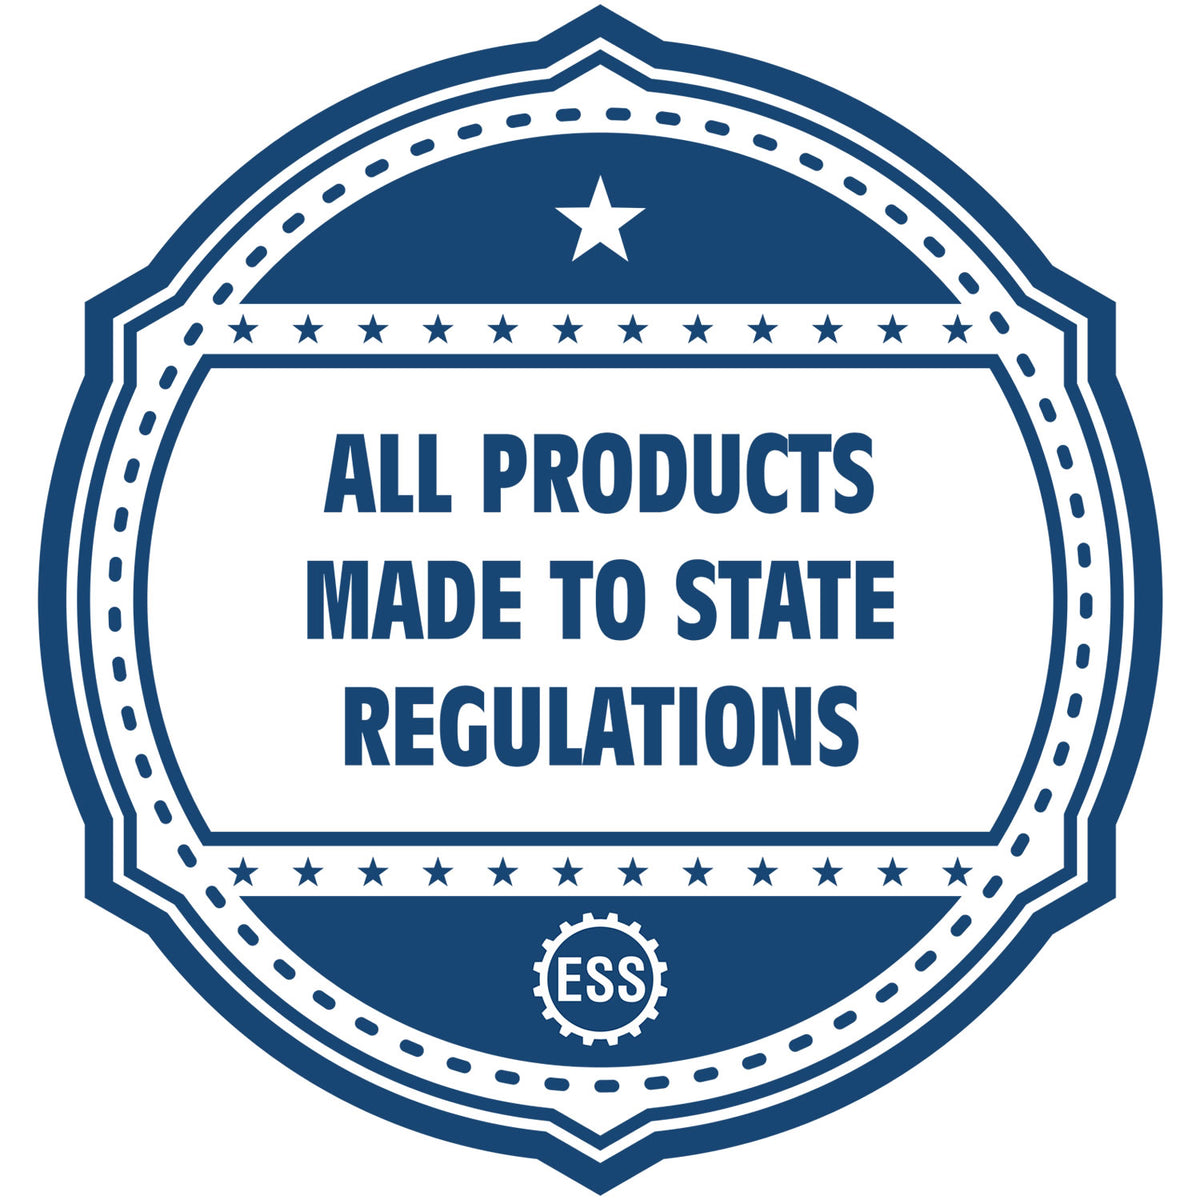 An icon or badge element for the Connecticut Desk Architect Embossing Seal showing that this product is made in compliance with state regulations.